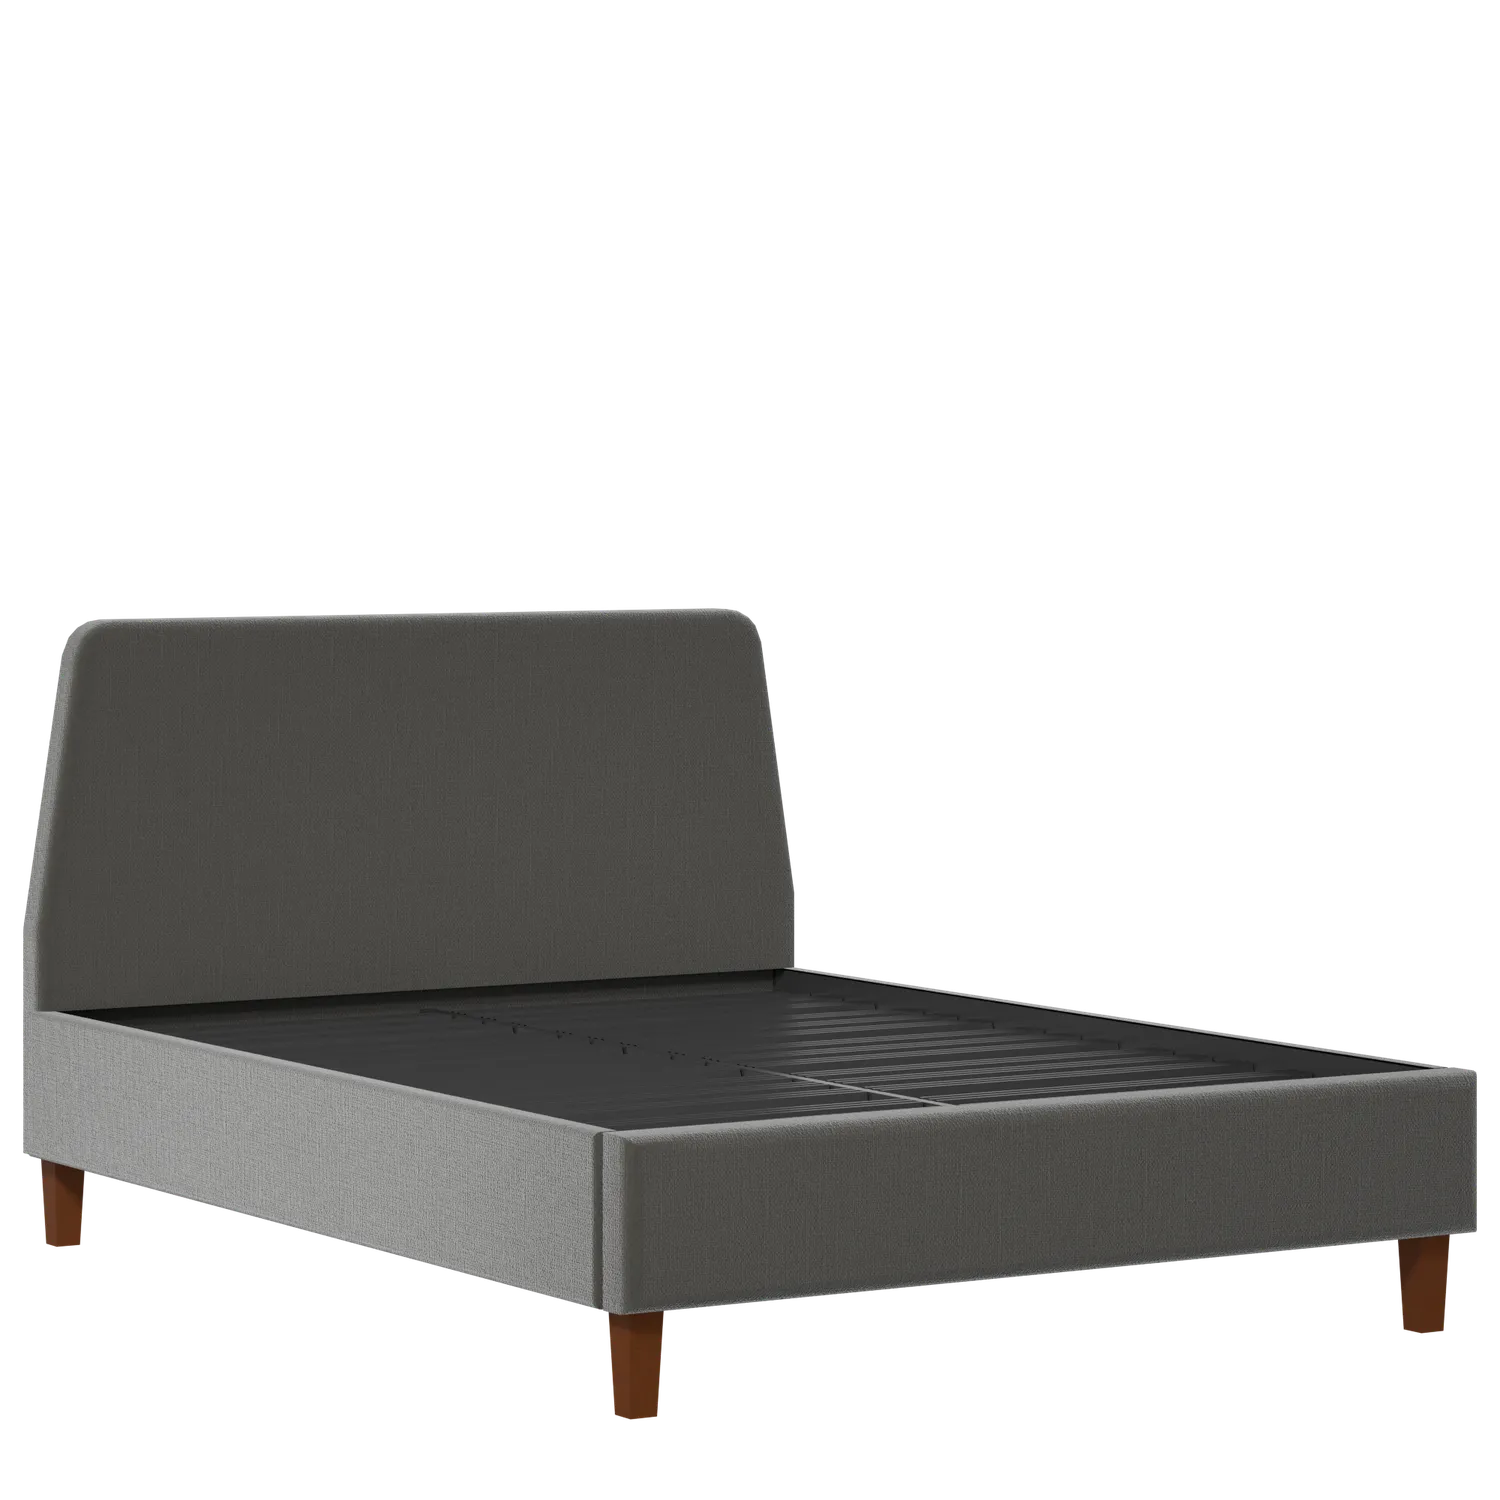 Hanwell Slim upholstered bed in iron fabric